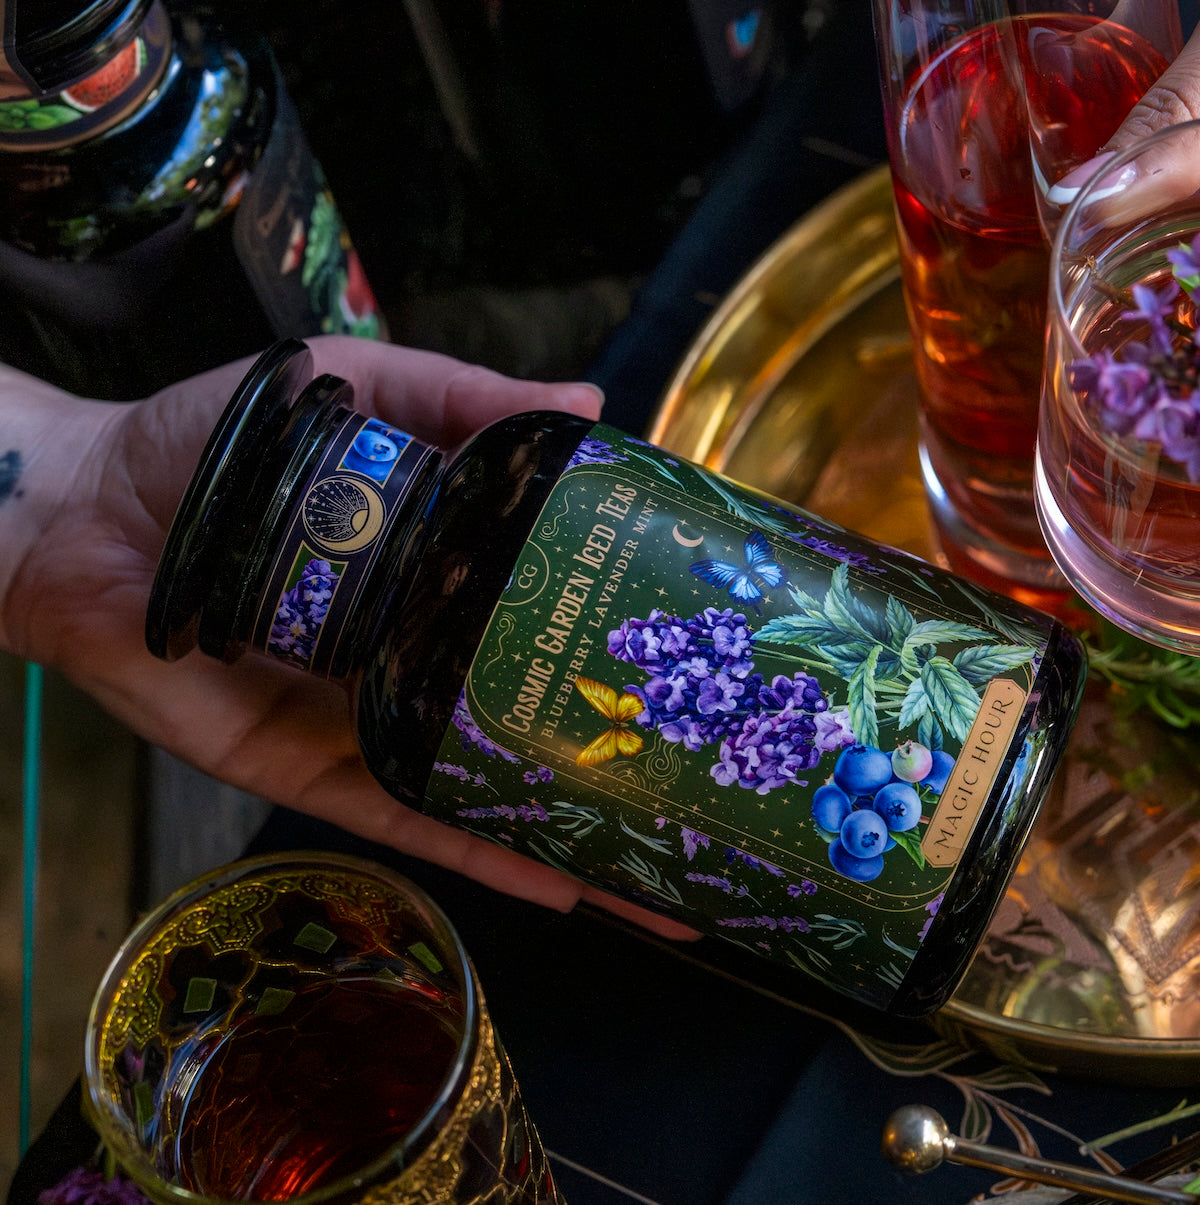 A hand holds a jar labeled &quot;Magic Hour&#39;s Blueberry Lavender Mint: Cosmic Garden Iced Tea&quot; with an intricate design featuring blueberries and purple flowers. The jar, brimming with fragrant loose leaf tea, is held over a gold tray surrounded by ornate glasses of beverages. The scene is dimly lit, creating a cozy and enchanting atmosphere.